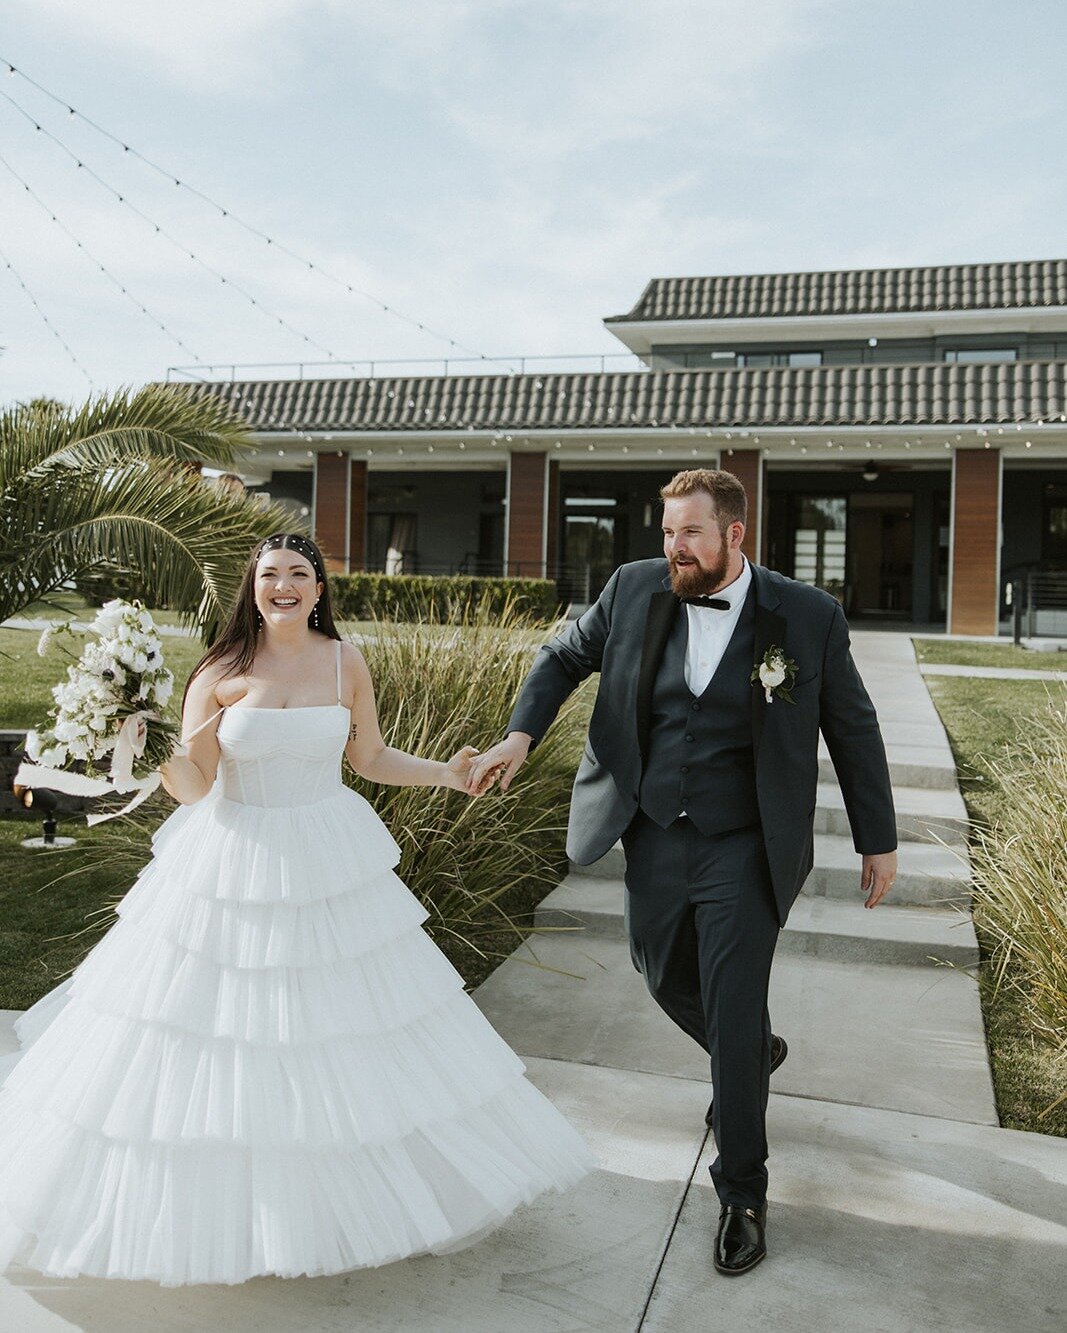 Safe to say HELLO Spring!!?🌿🌷😊
We can't wait for all of our spring wedding and events just around the corner!
Stay tuned for all the day-of content! 

Future couples, comment below what Day-Of content you'd like to see more of 😍

Venue: @lotushou